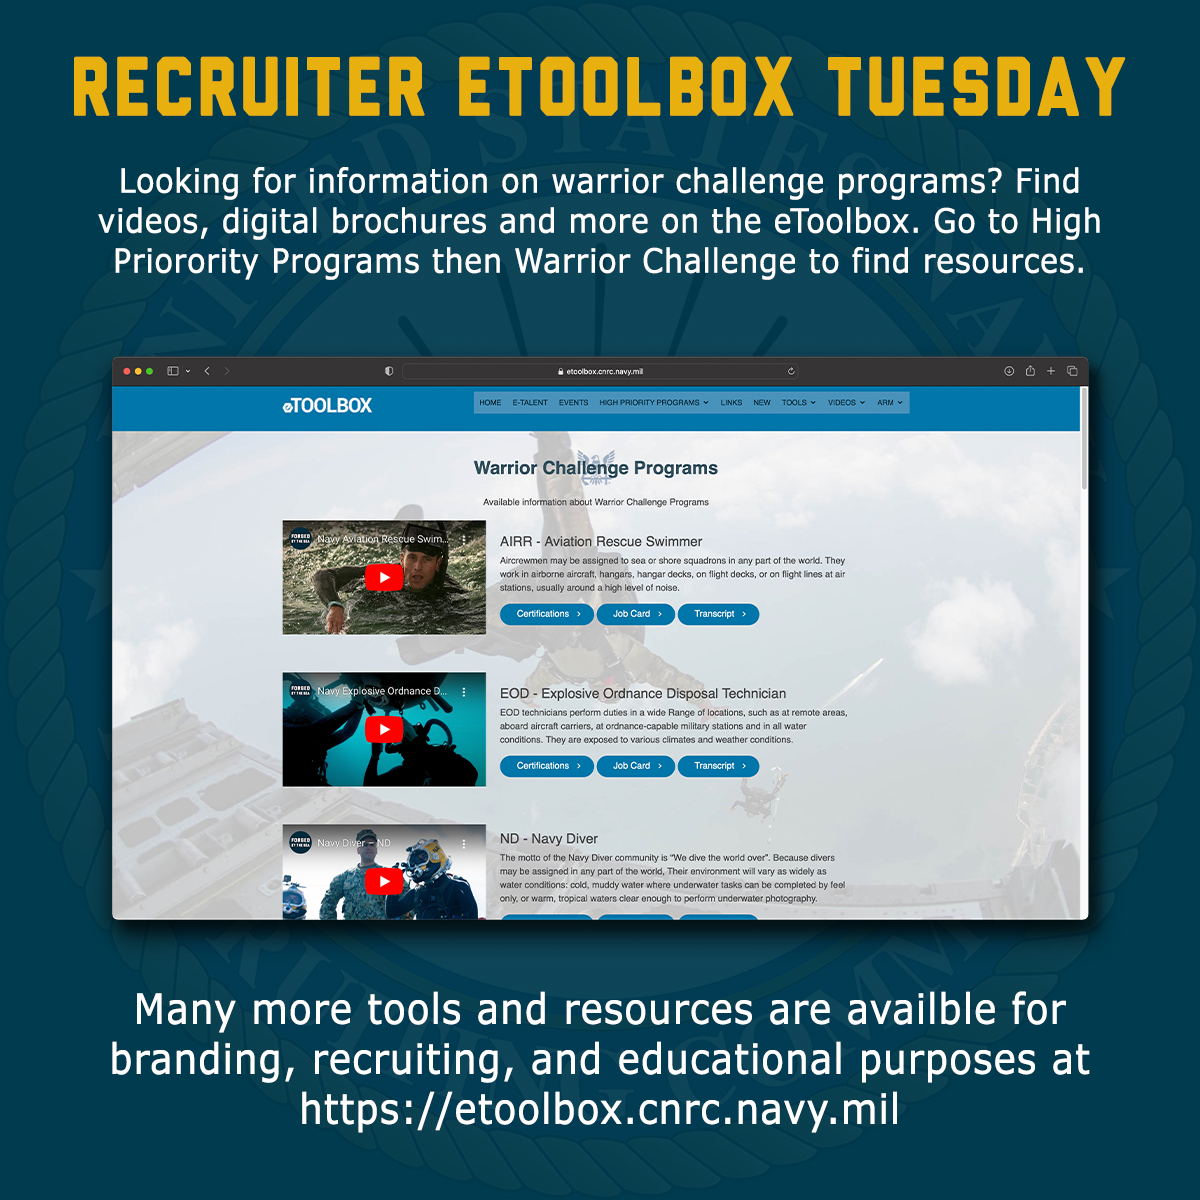 Check out the Recruiter eToolbox for more tools and resources available. etoolbox.cnrc.navy.mil #USNavy #Recruiting #Forgedbythesea